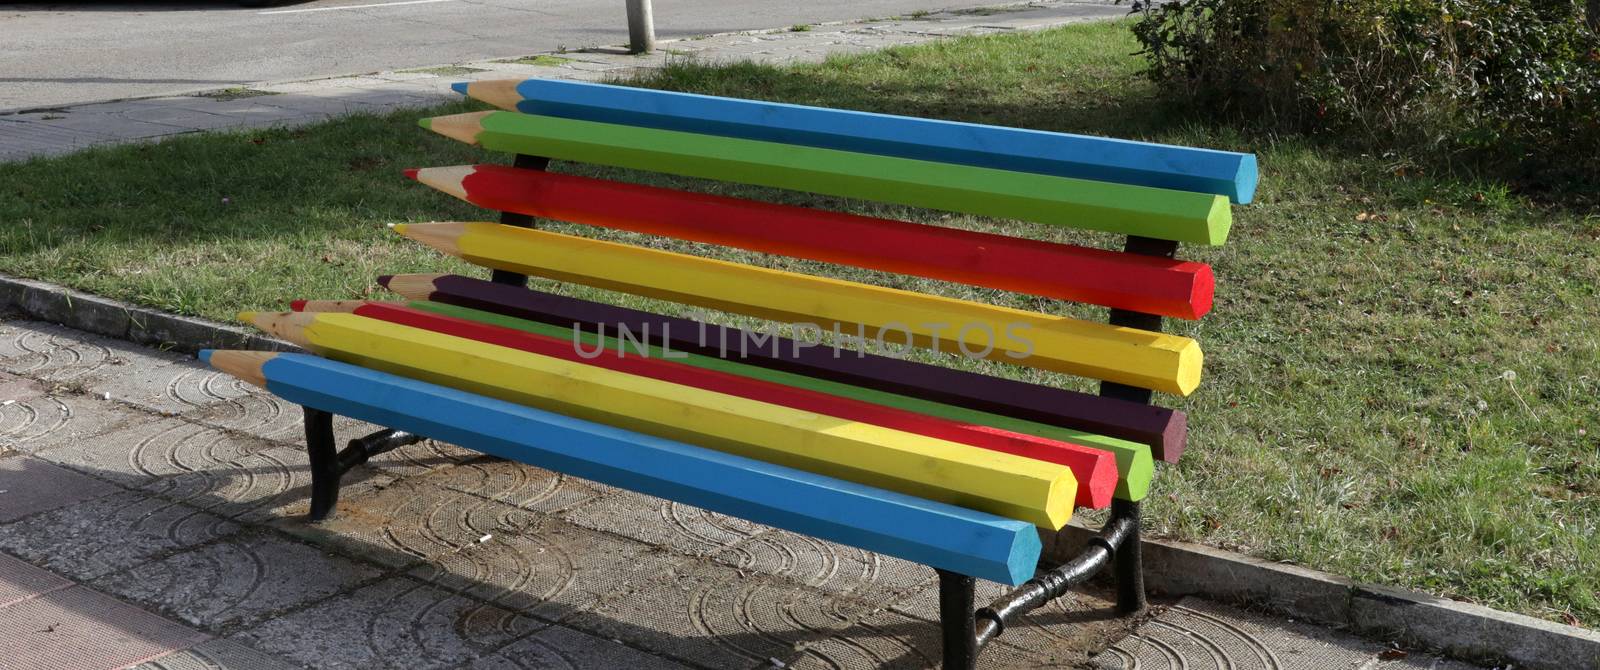 Bench of colorful pencils by georgid